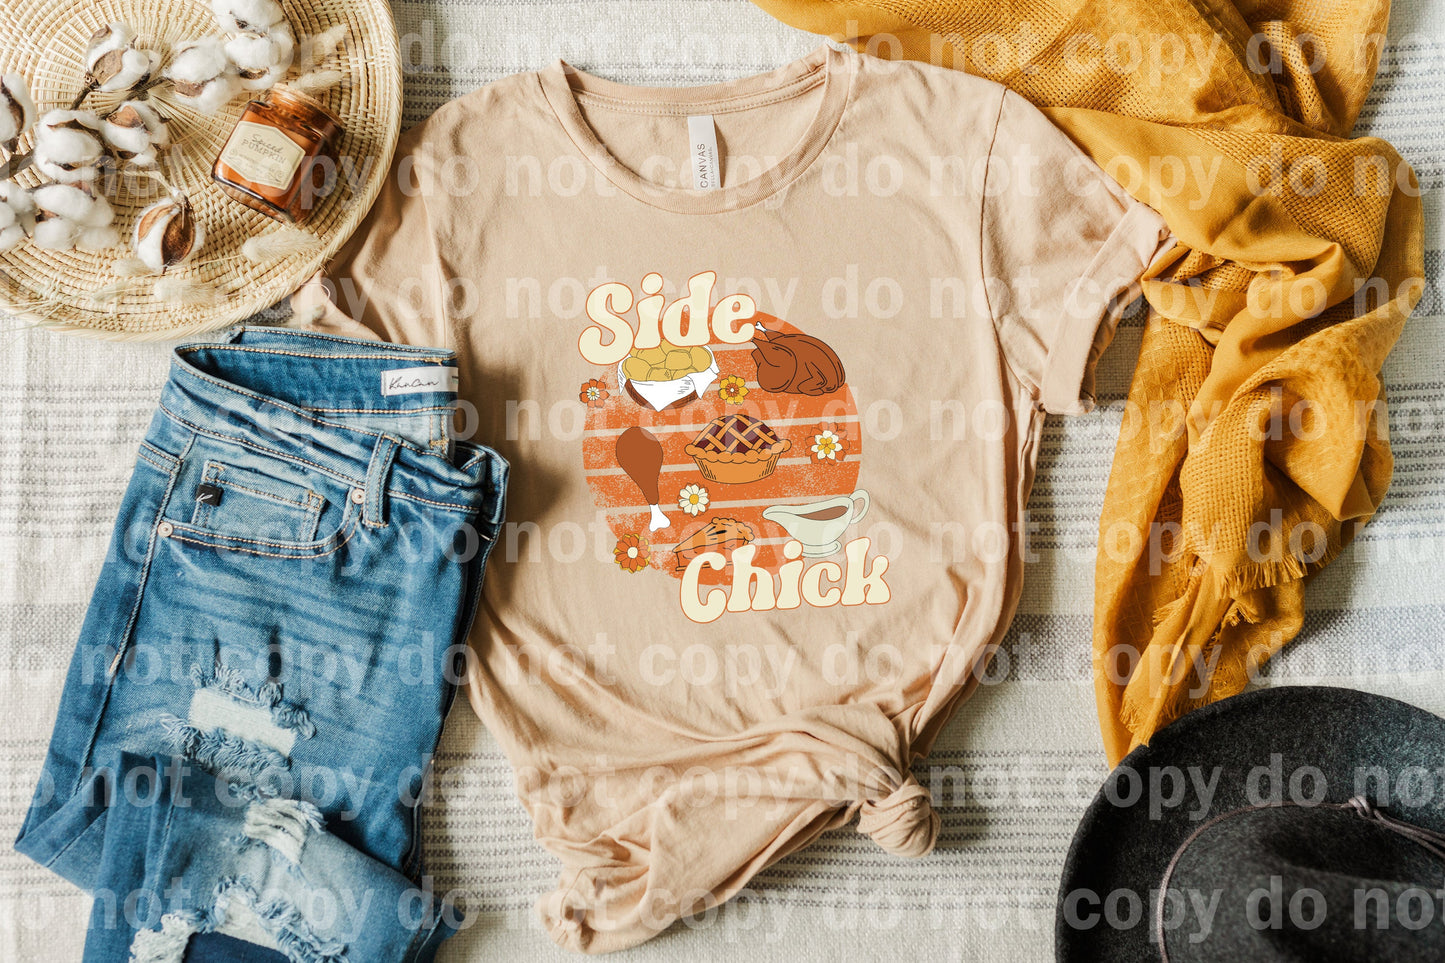 Side Chick Dream Print or Sublimation Print